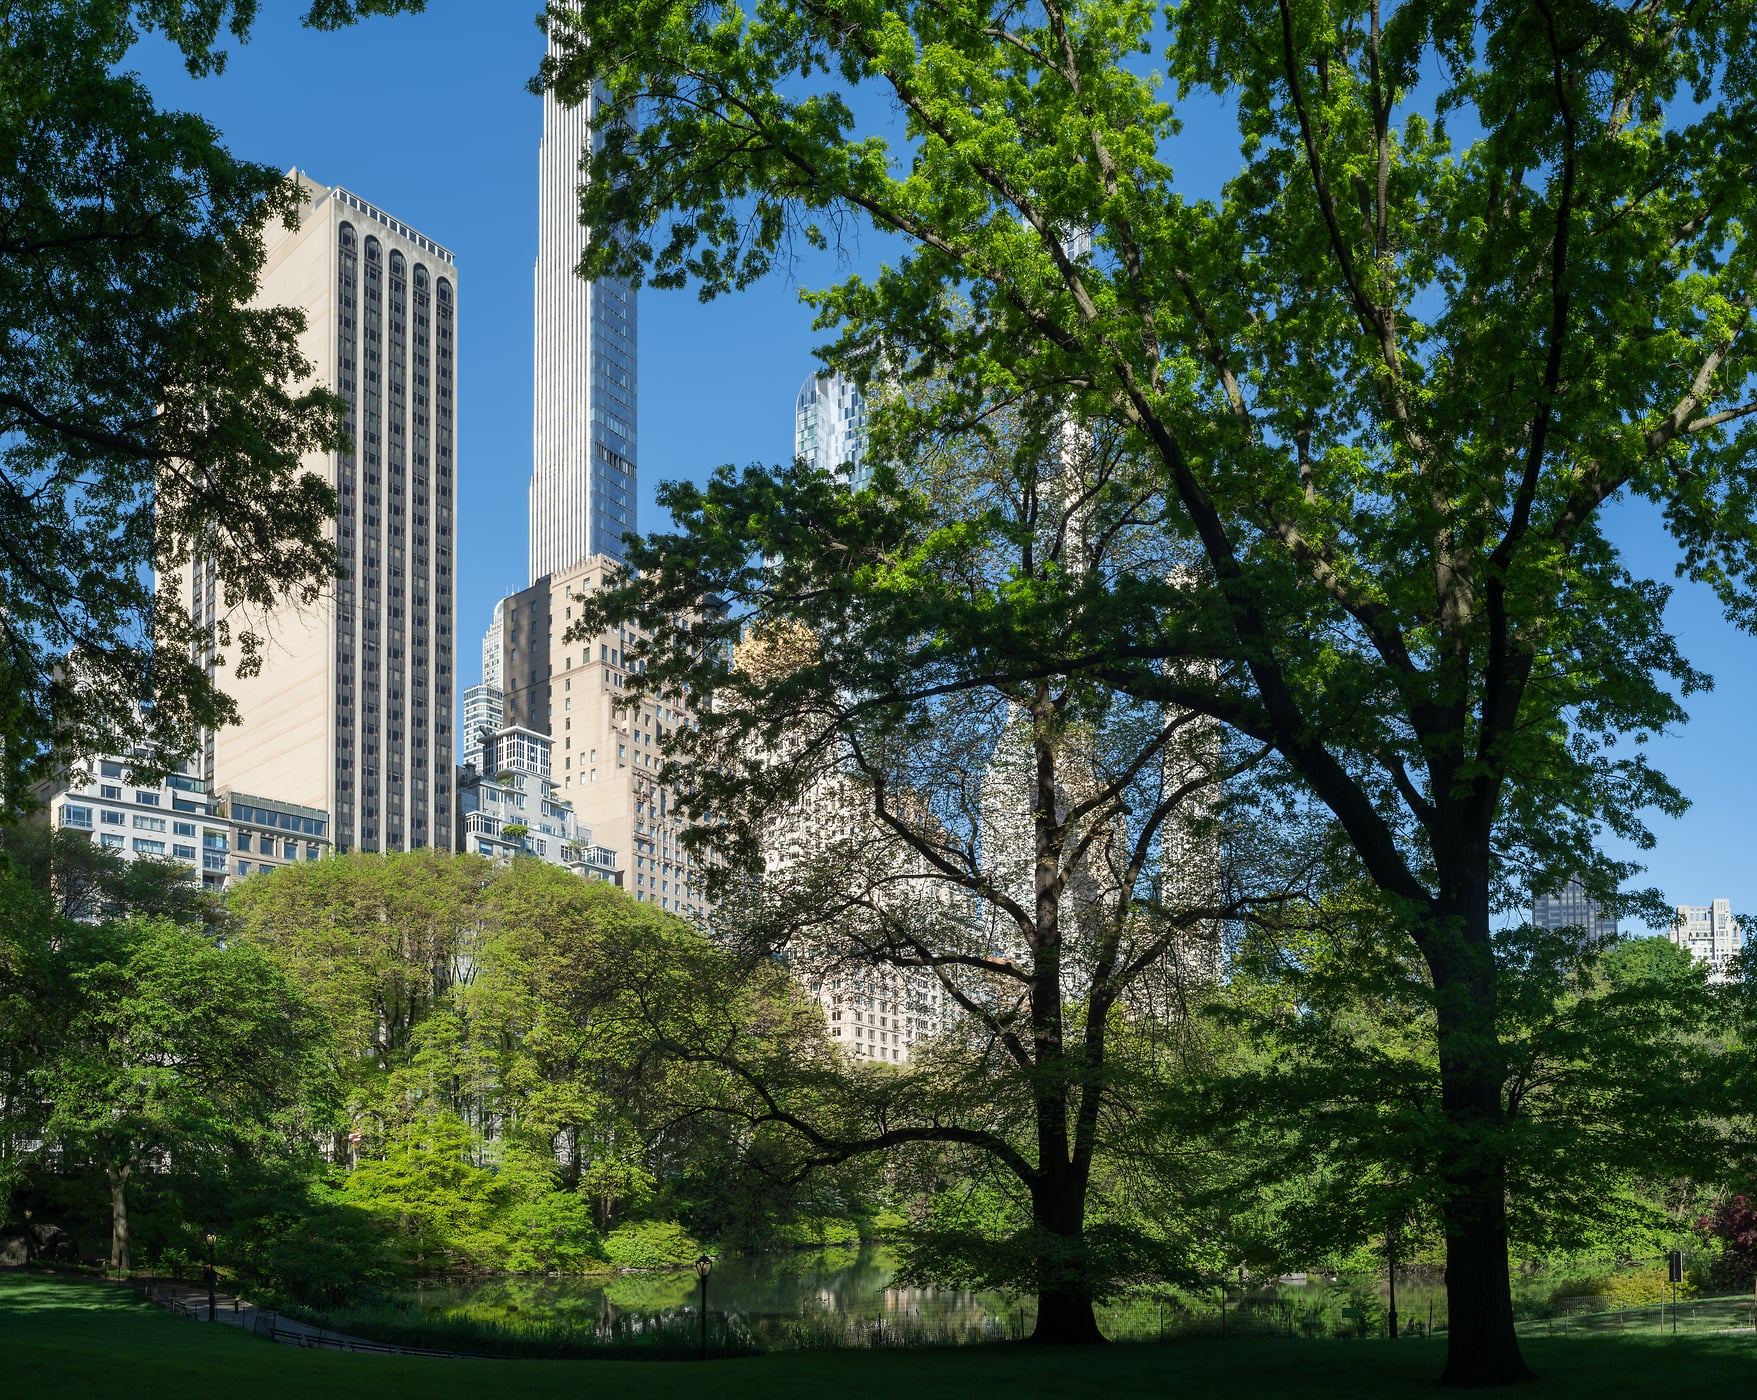 209 megapixels! A very high resolution, large-format VAST photo print of green trees with skyscrapers in the background; photograph created by Greg Probst in Central Park, New York City.